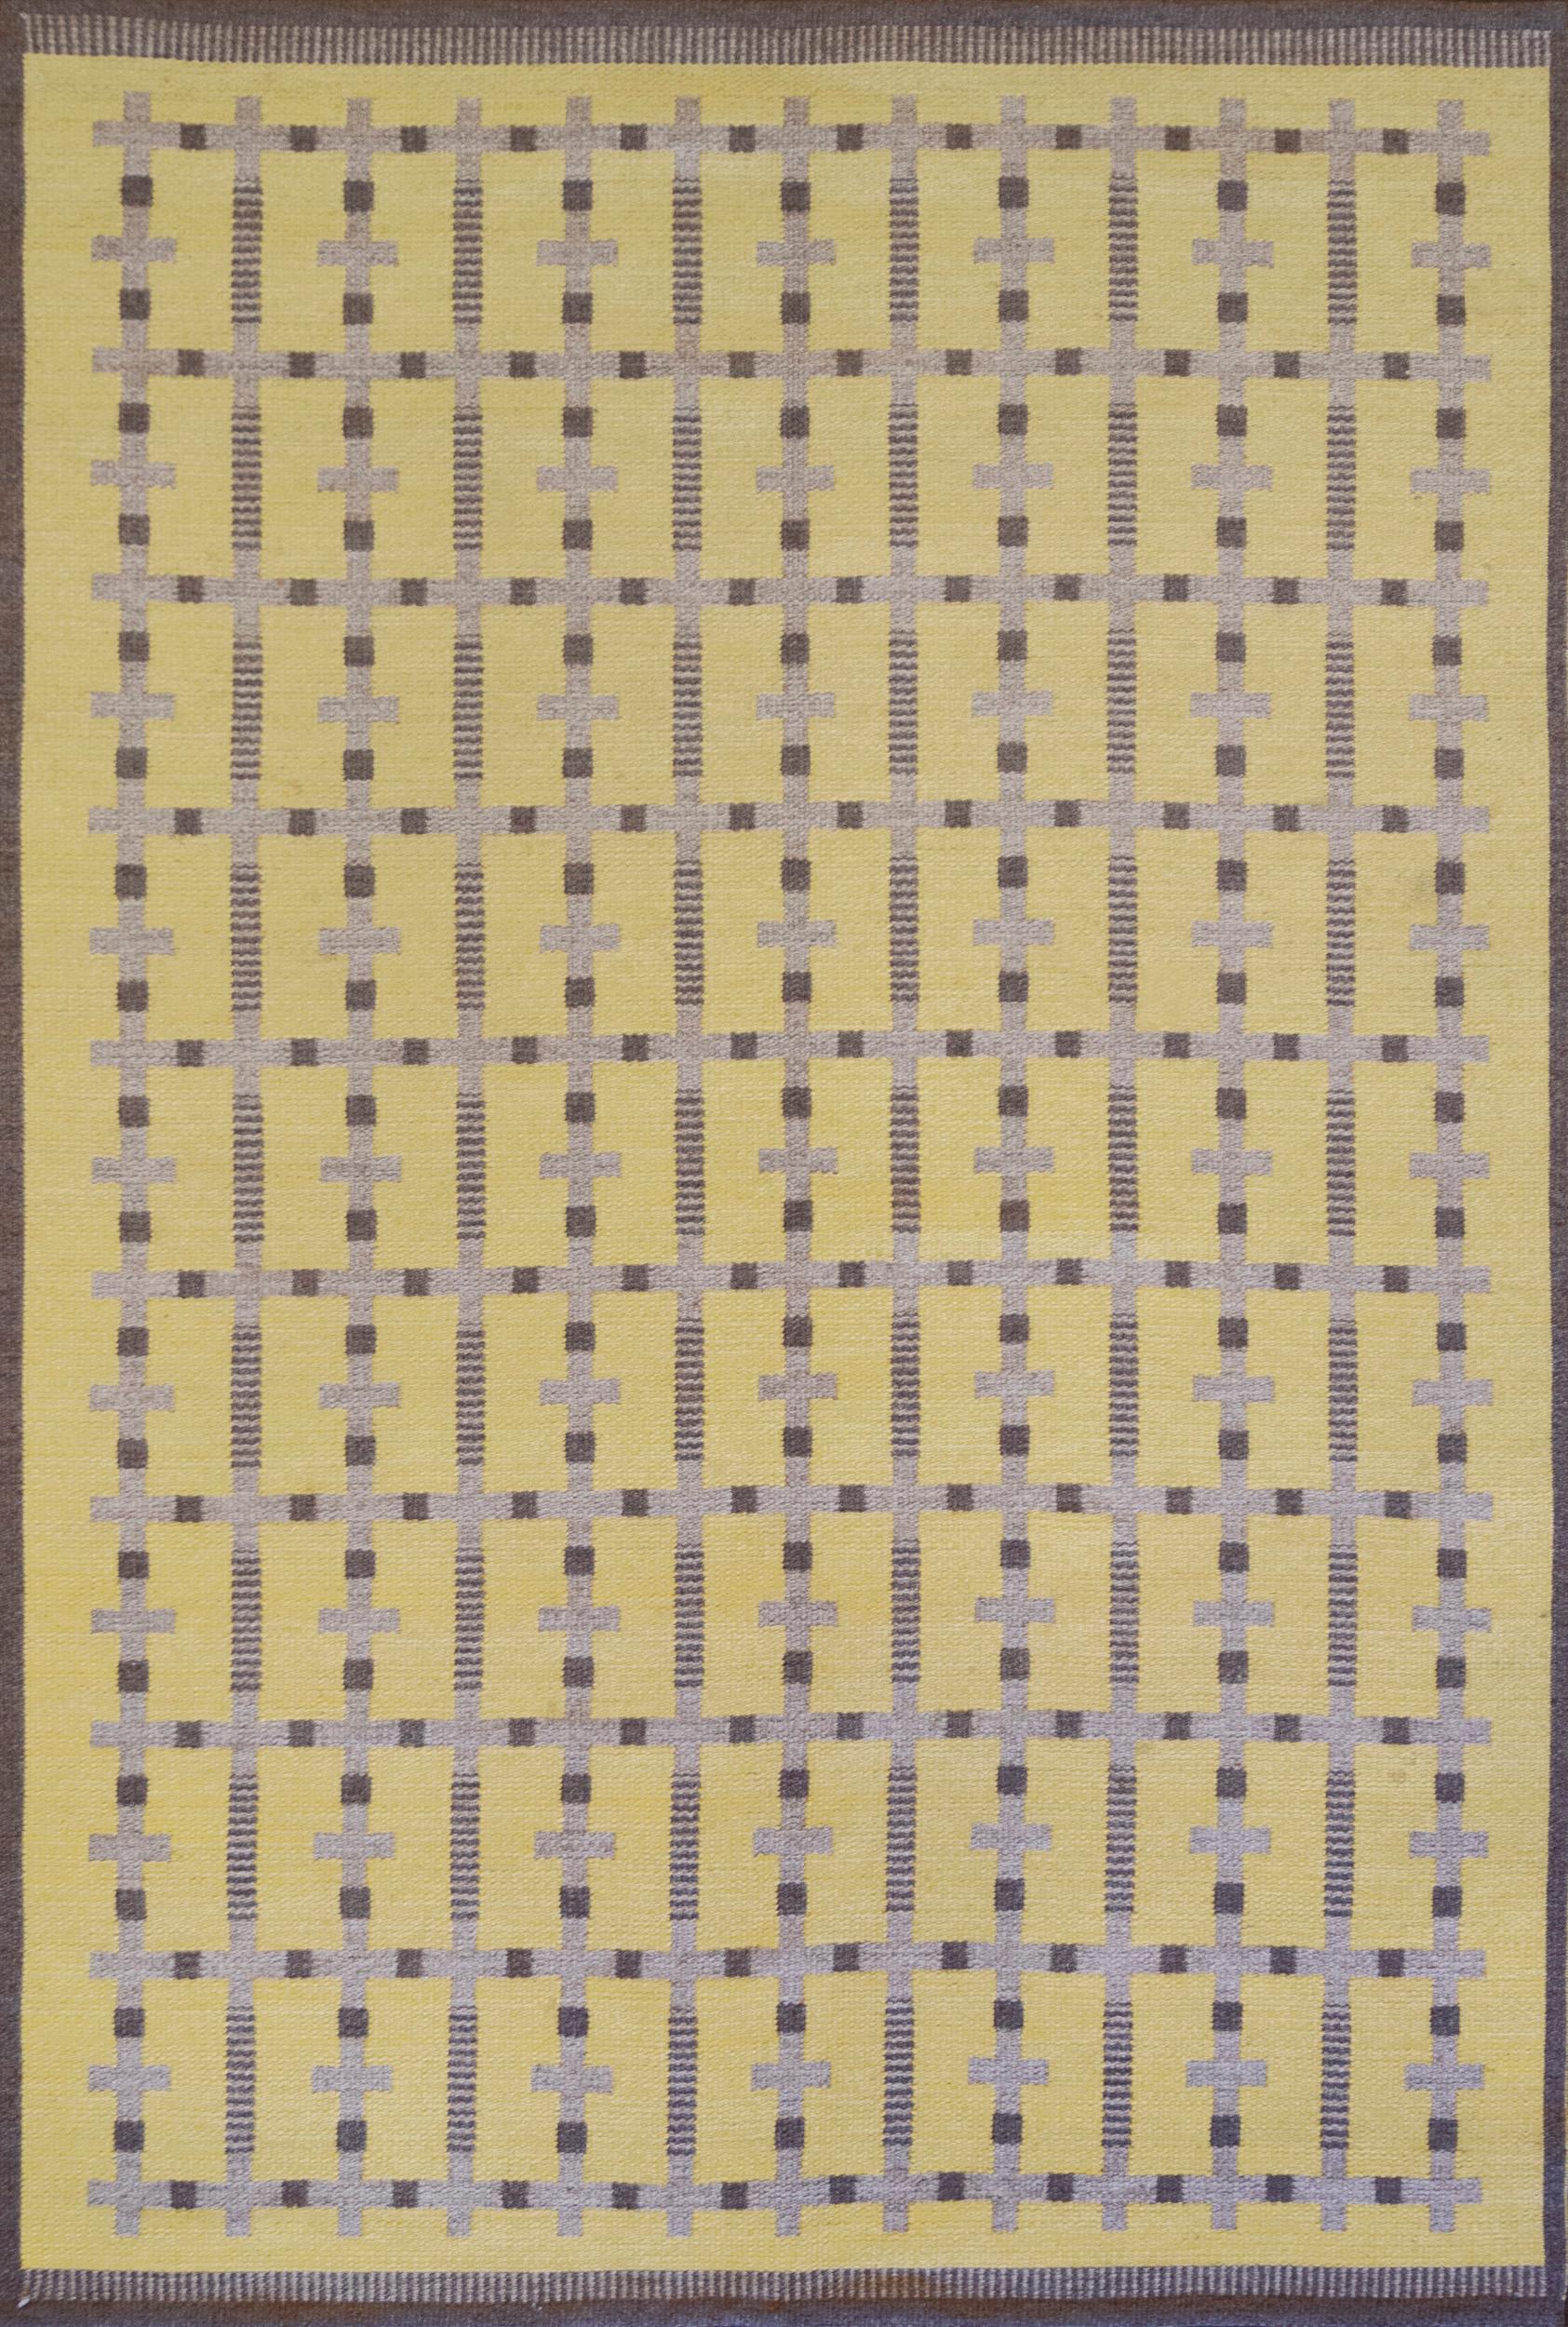 This handwoven vintage Swedish flat-weave rug is double-sided, either side can be displayed to match your decor. One side has a brown overall field with a darker brown and yellow cruciform lattice in a yellow border. The alternate side has a yellow